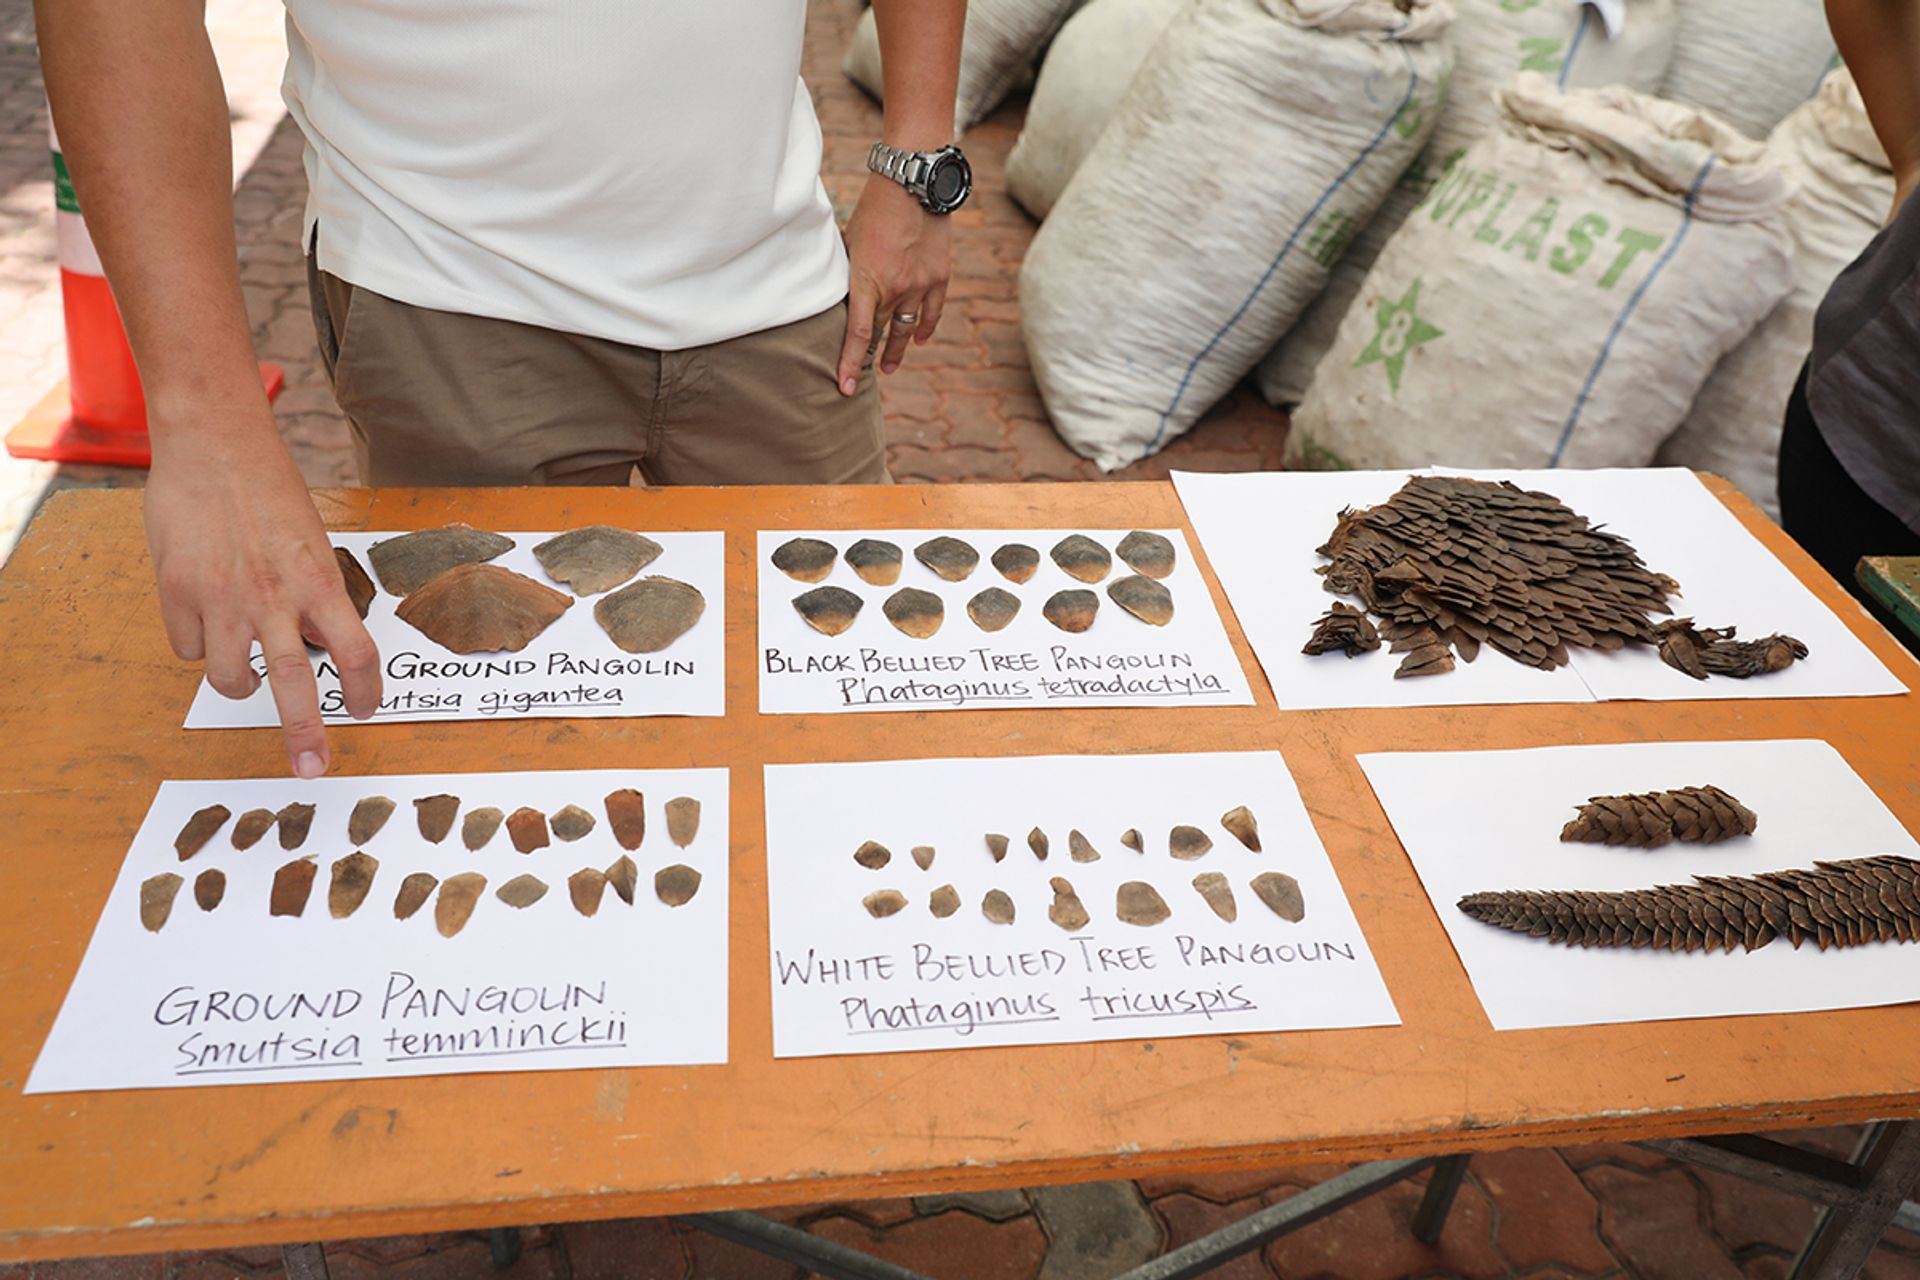 The scales seized on April 3, 2019, originated from Nigeria and were bound for Vietnam. Pangolin meat and scales are considered to be a delicacy and to possess healing properties in Vietnamese traditional medicine.